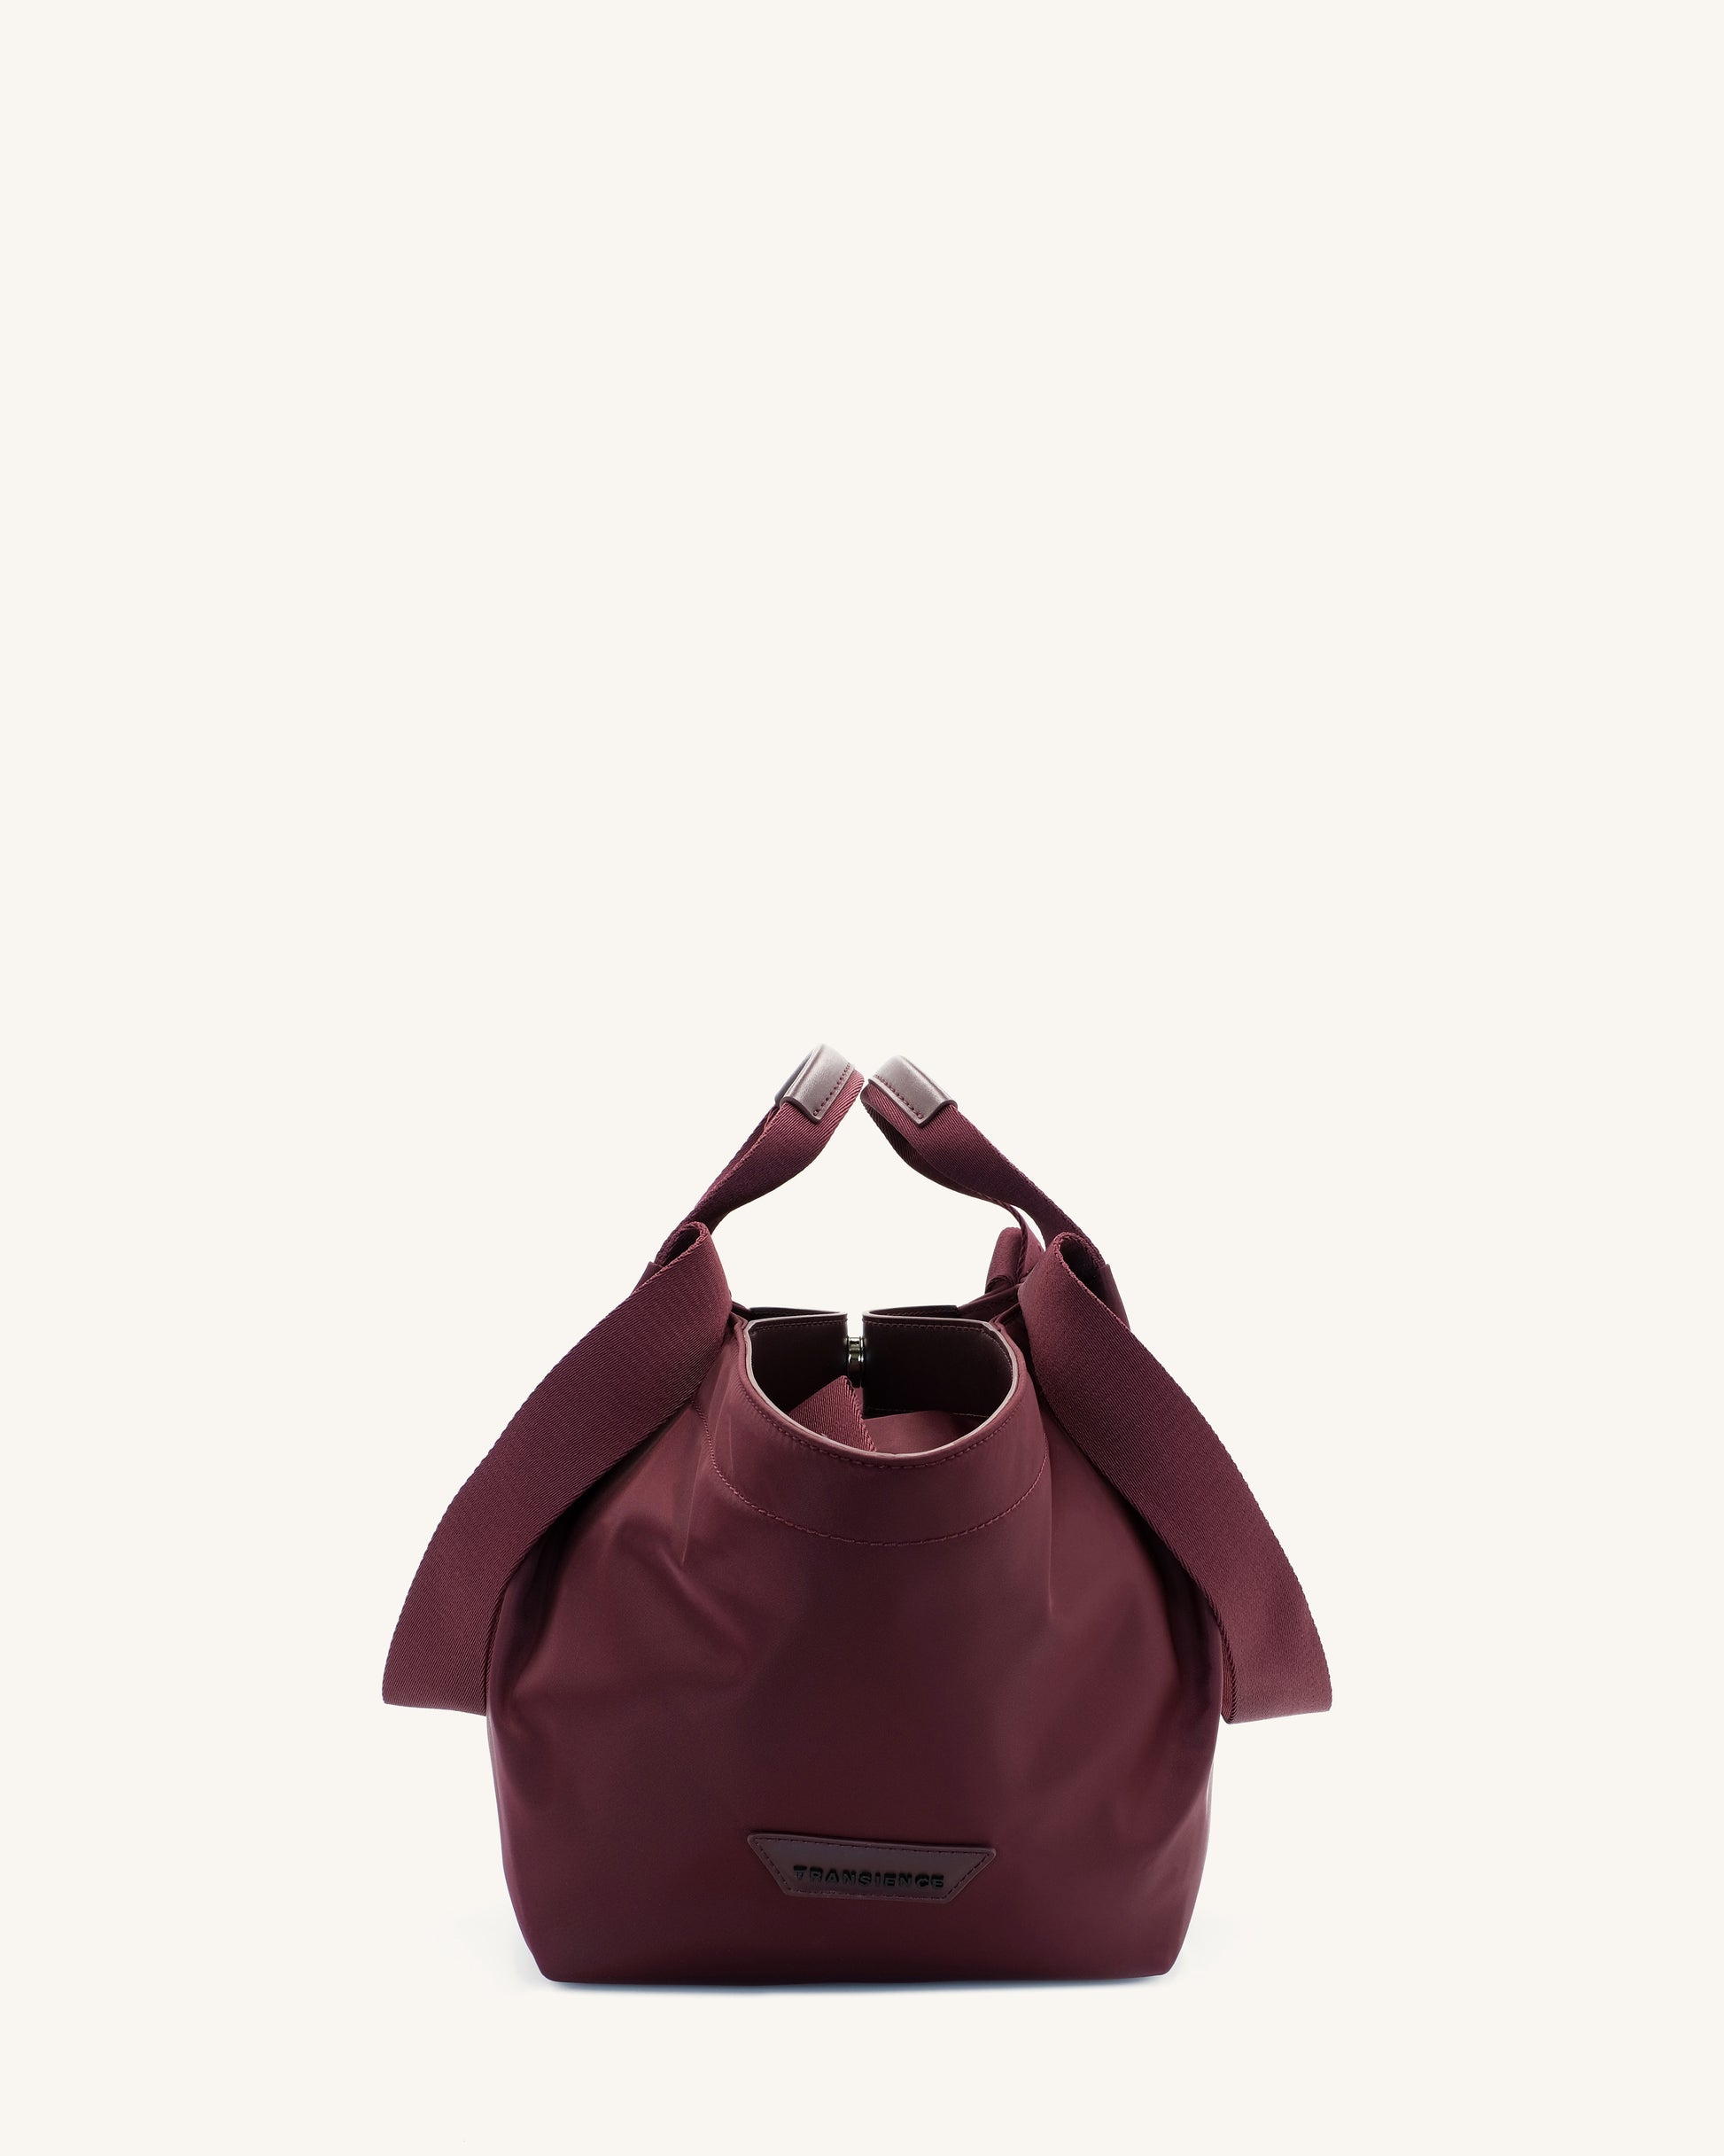 SMALL FORTUNE TOTE - MULBERRY – TRANSIENCE